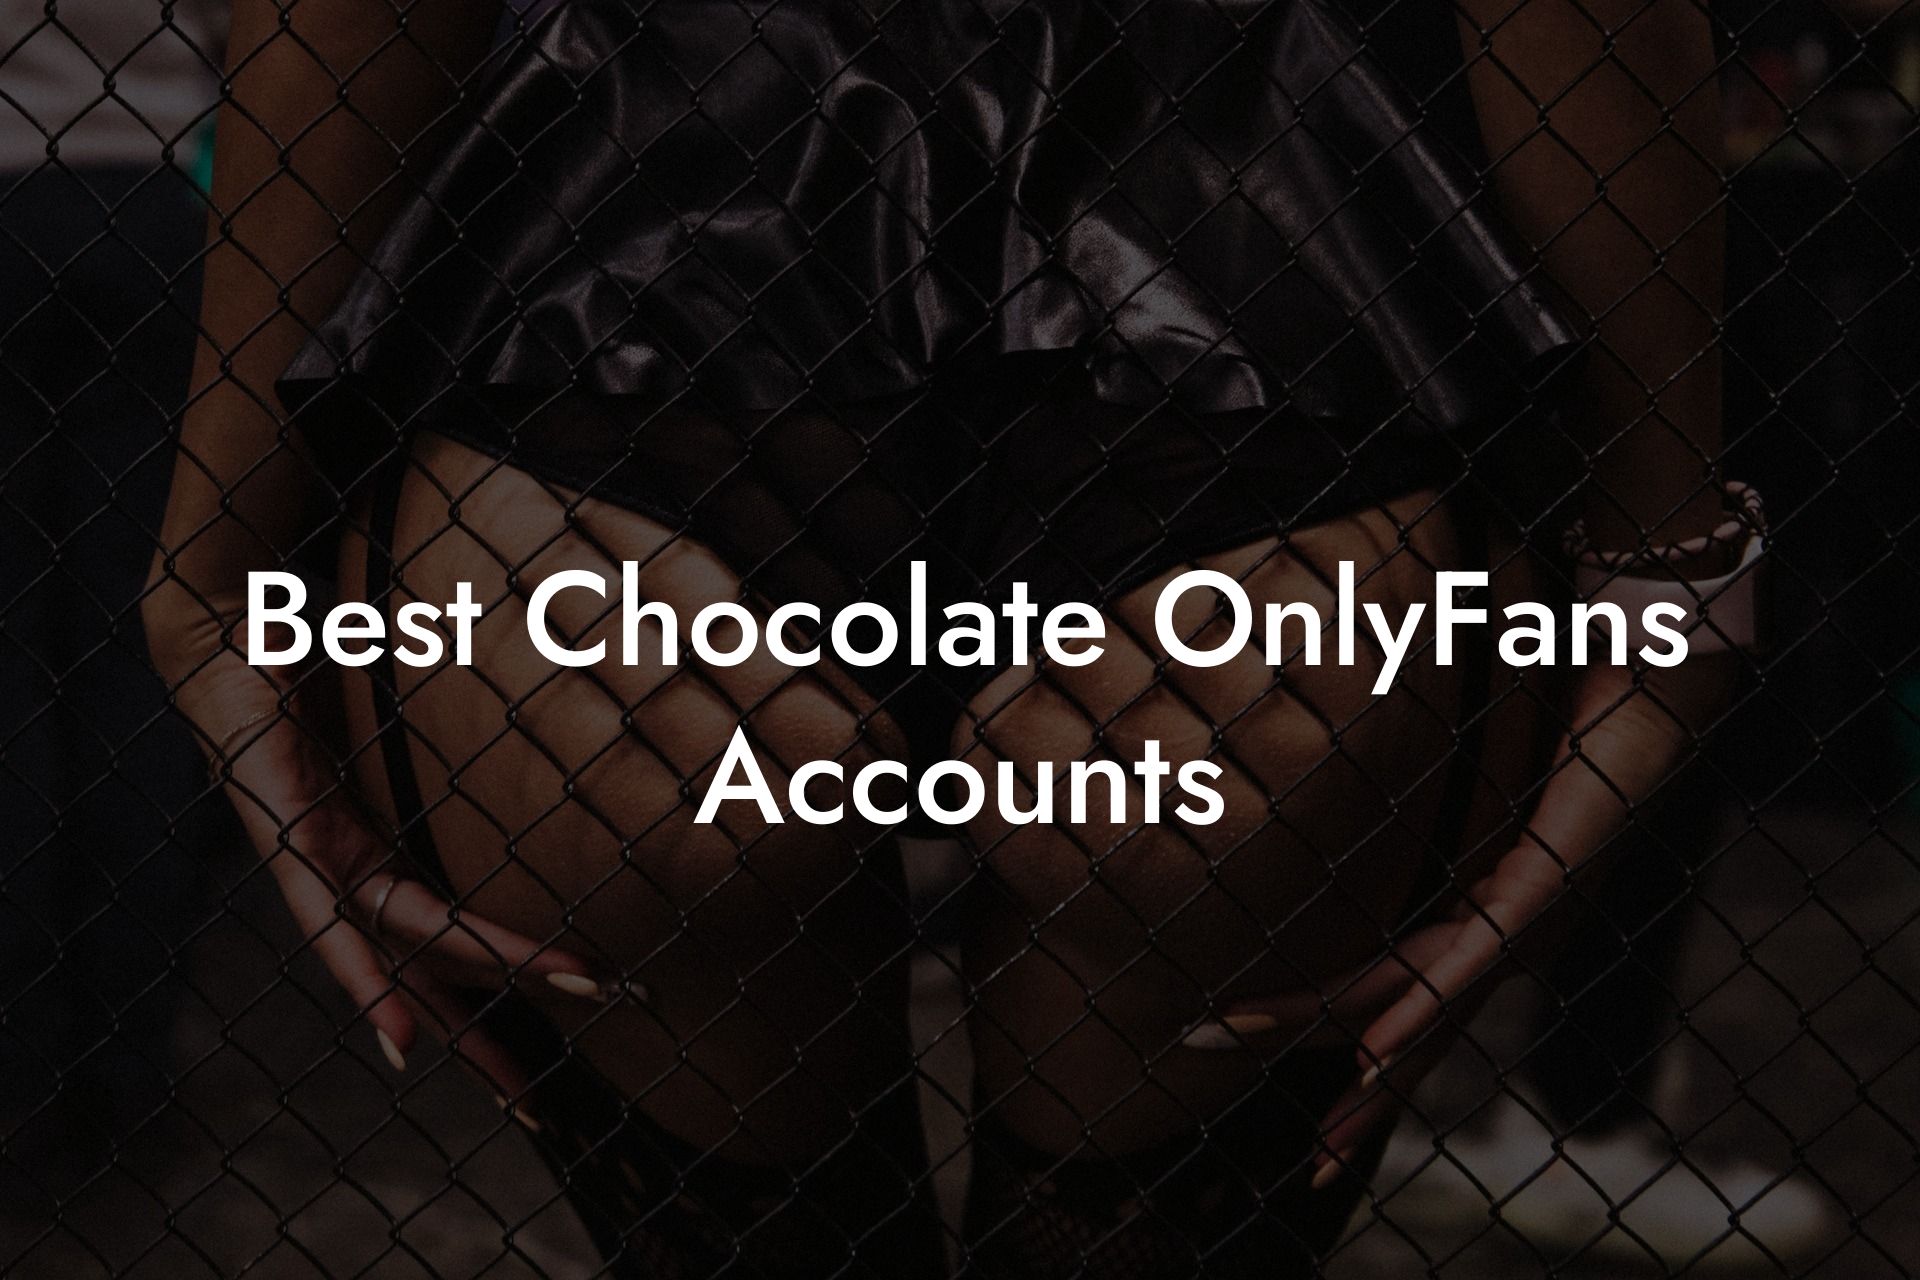 Best Chocolate OnlyFans Accounts